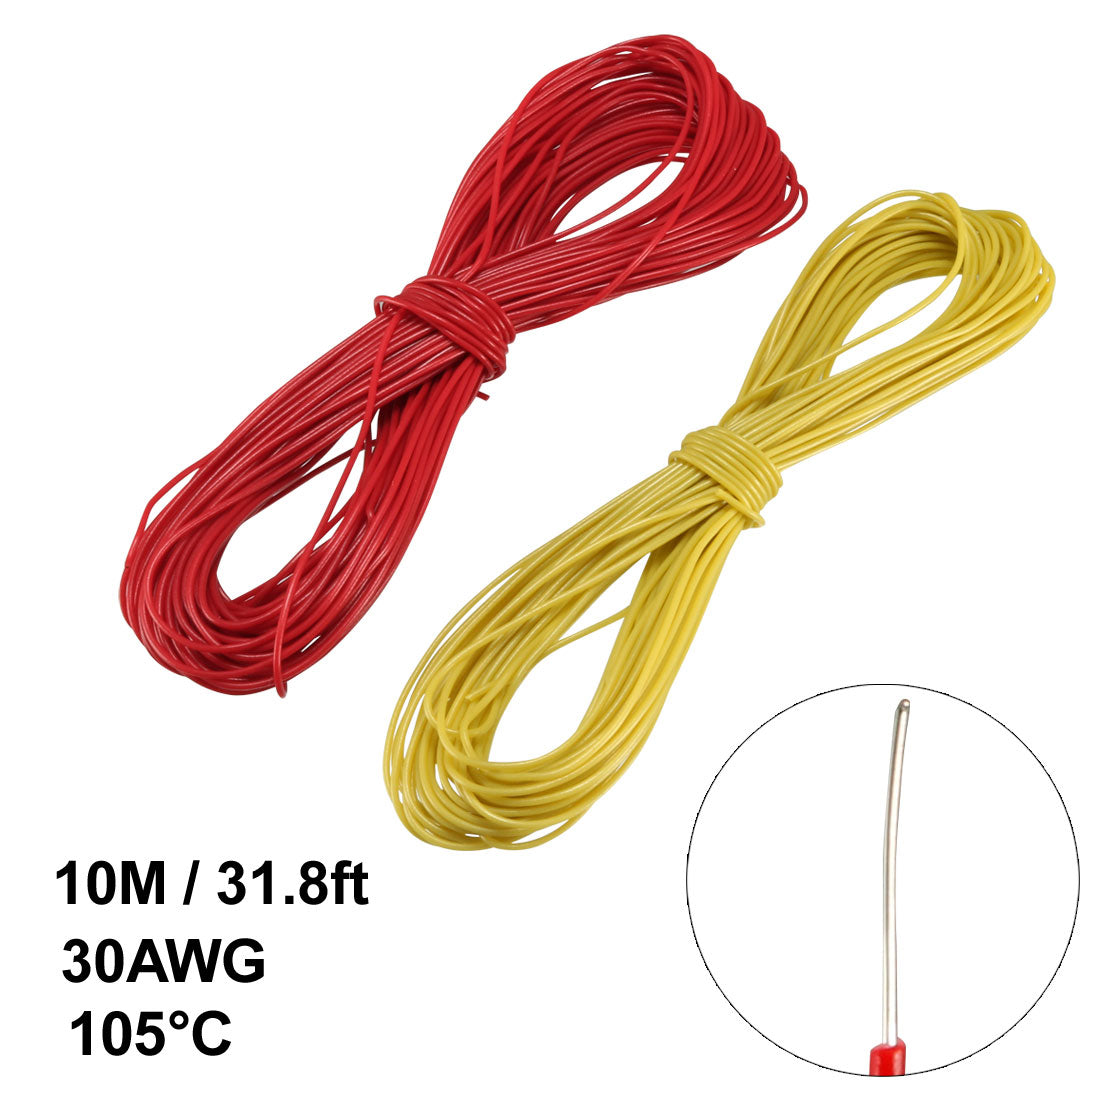 uxcell Uxcell 2 Pcs Wrapping Wire Tin Plated Copper Wire P/N 30 AWG 10M Length Red Yellow